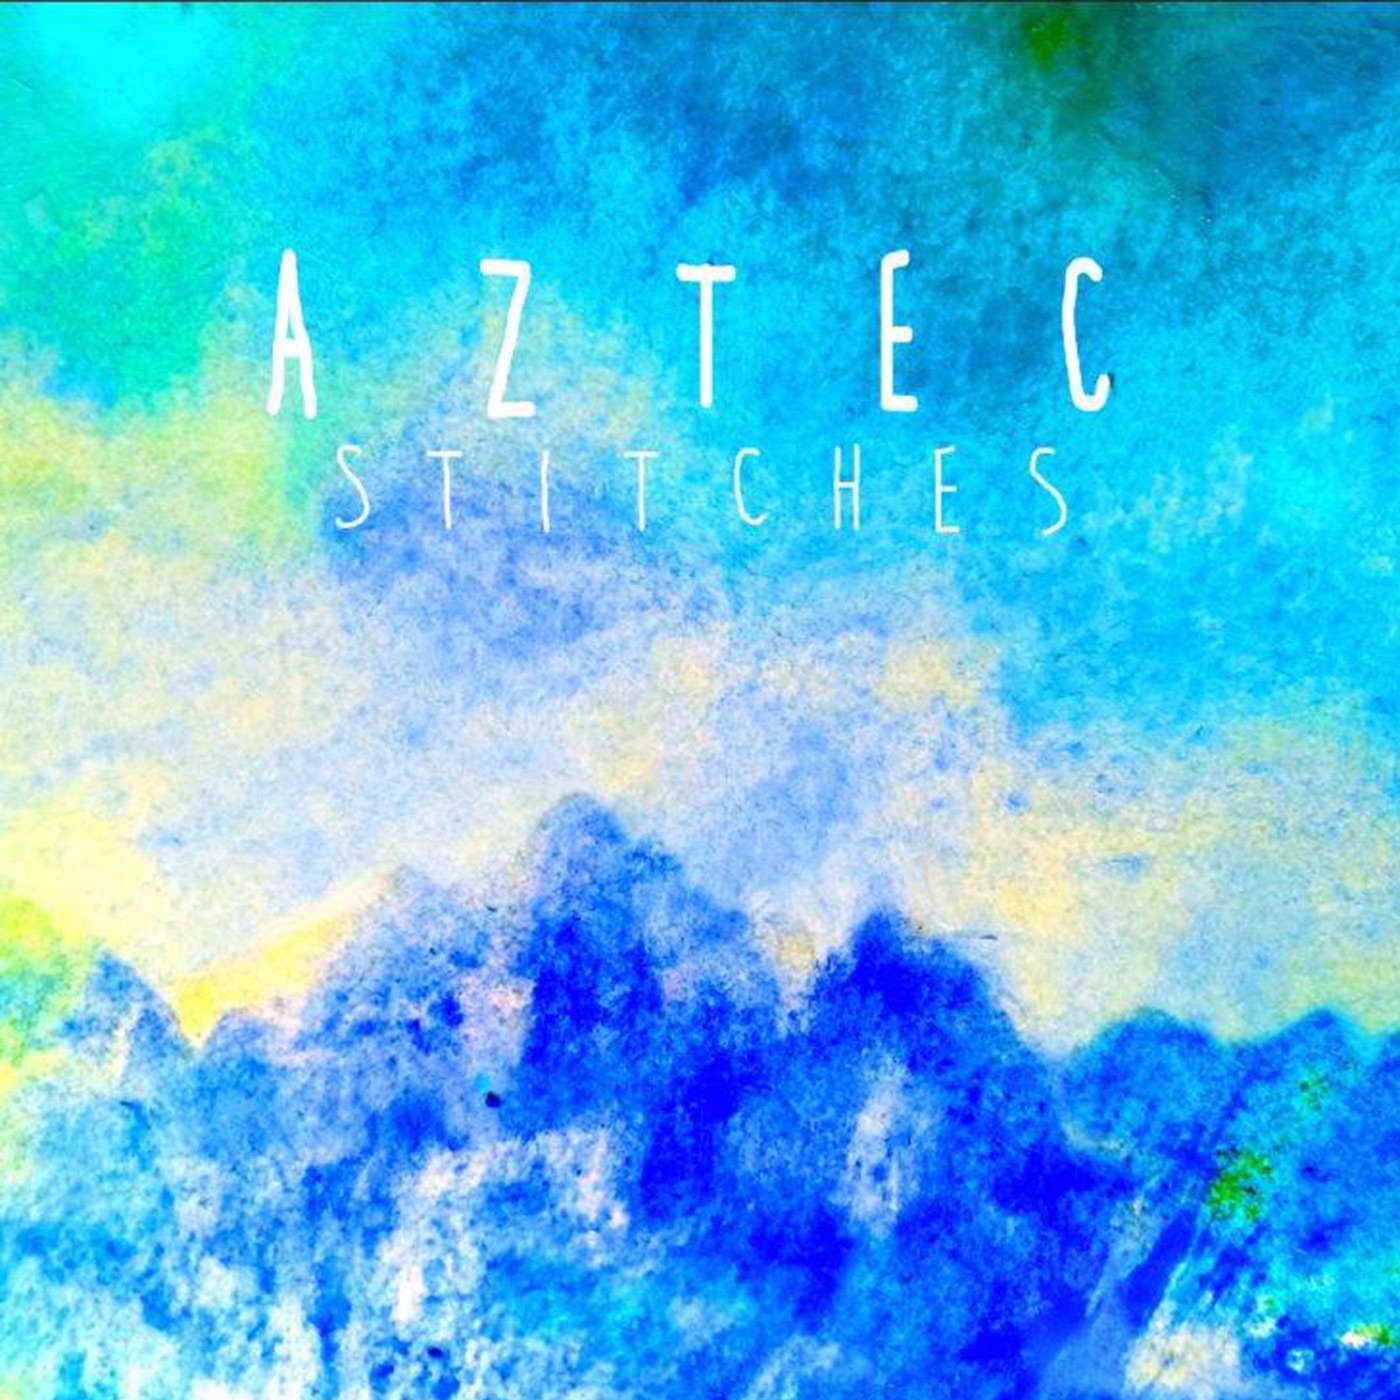 Stitches by Aztec